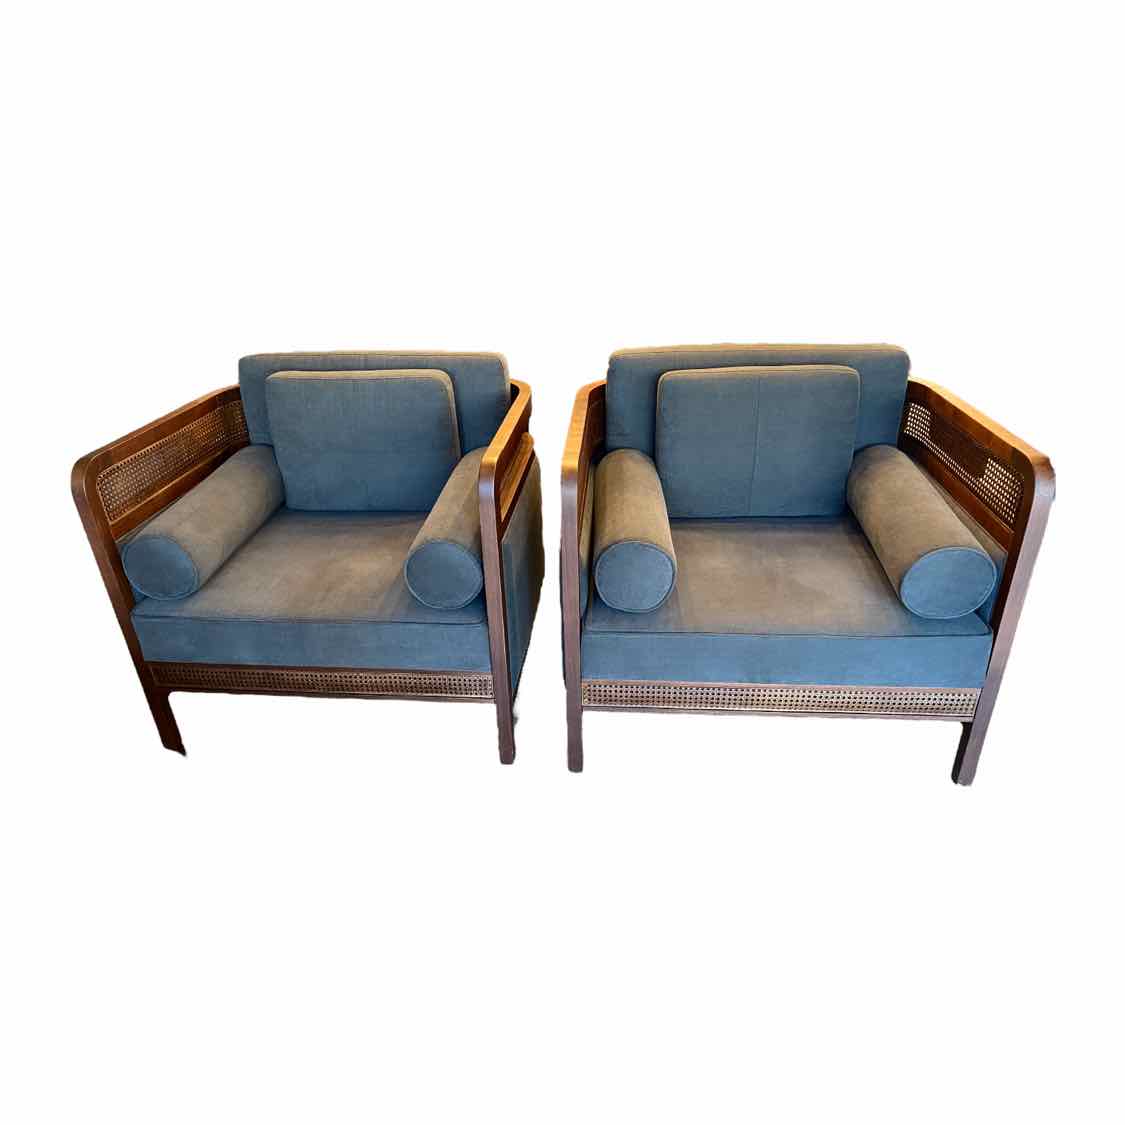 Pair of Tailors Club Chairs. Cherry Wood and Woven Cane in Gray Fabric